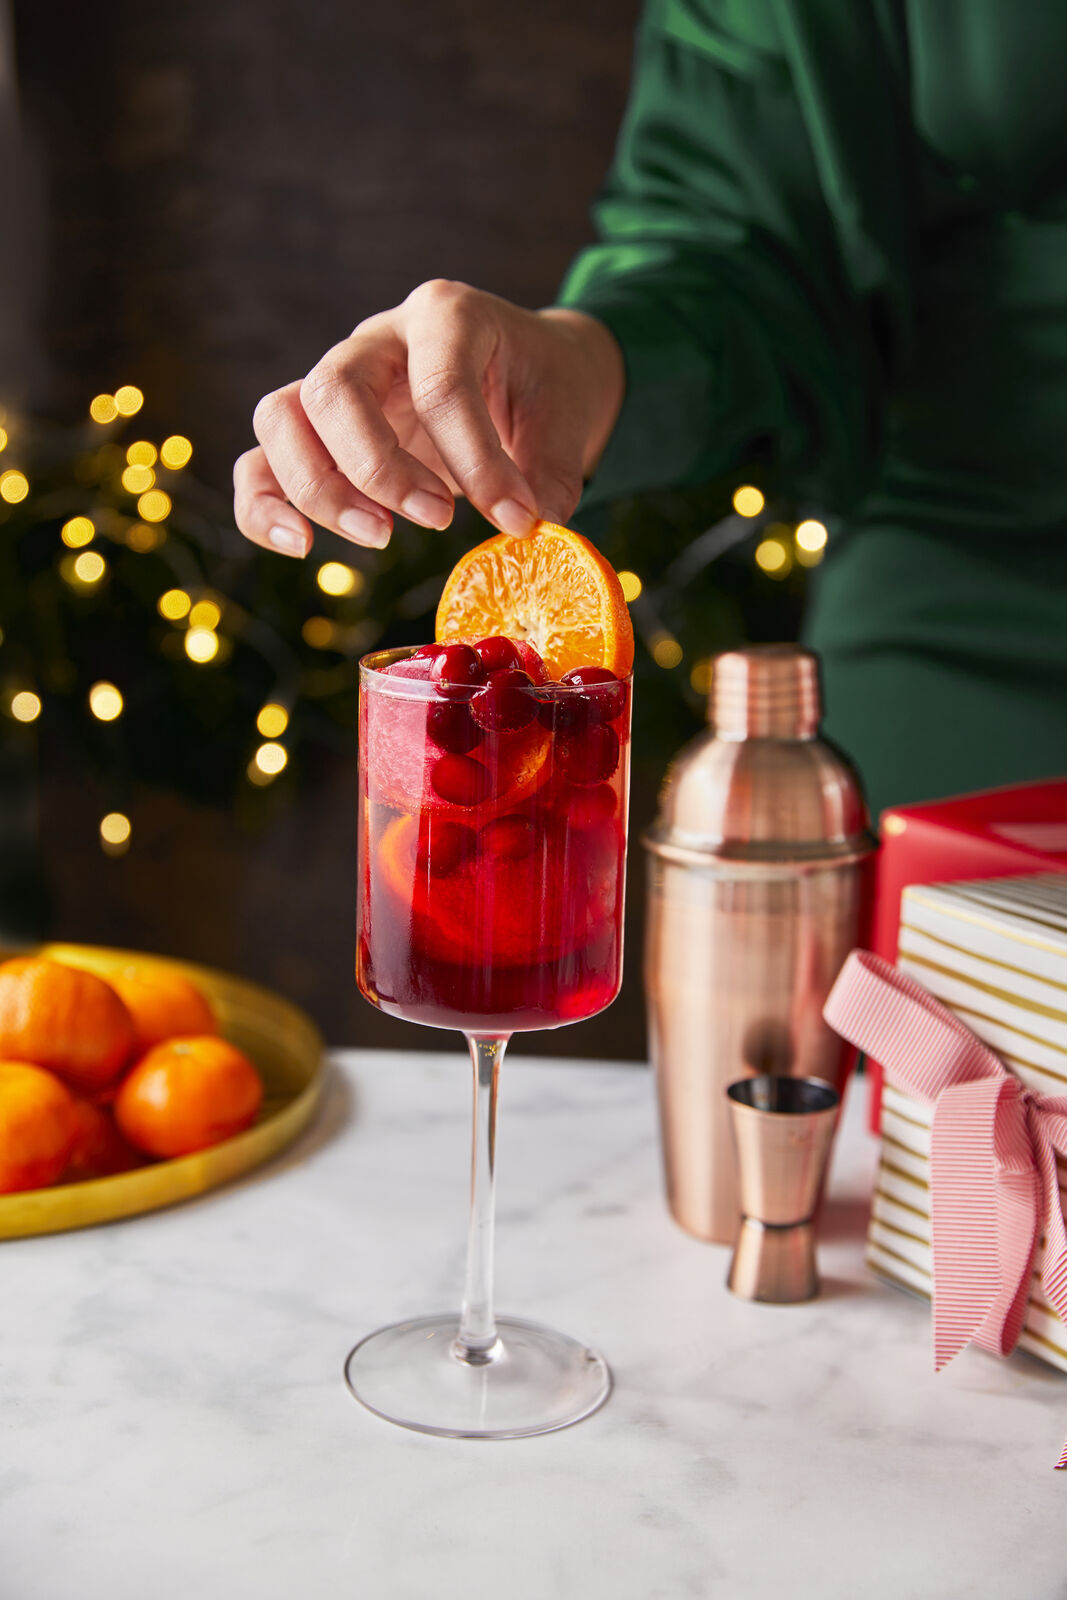 Stemmed wine glass filled with iced Merry Maker's Punch with cranberries and an orange garnish in a holiday scene.